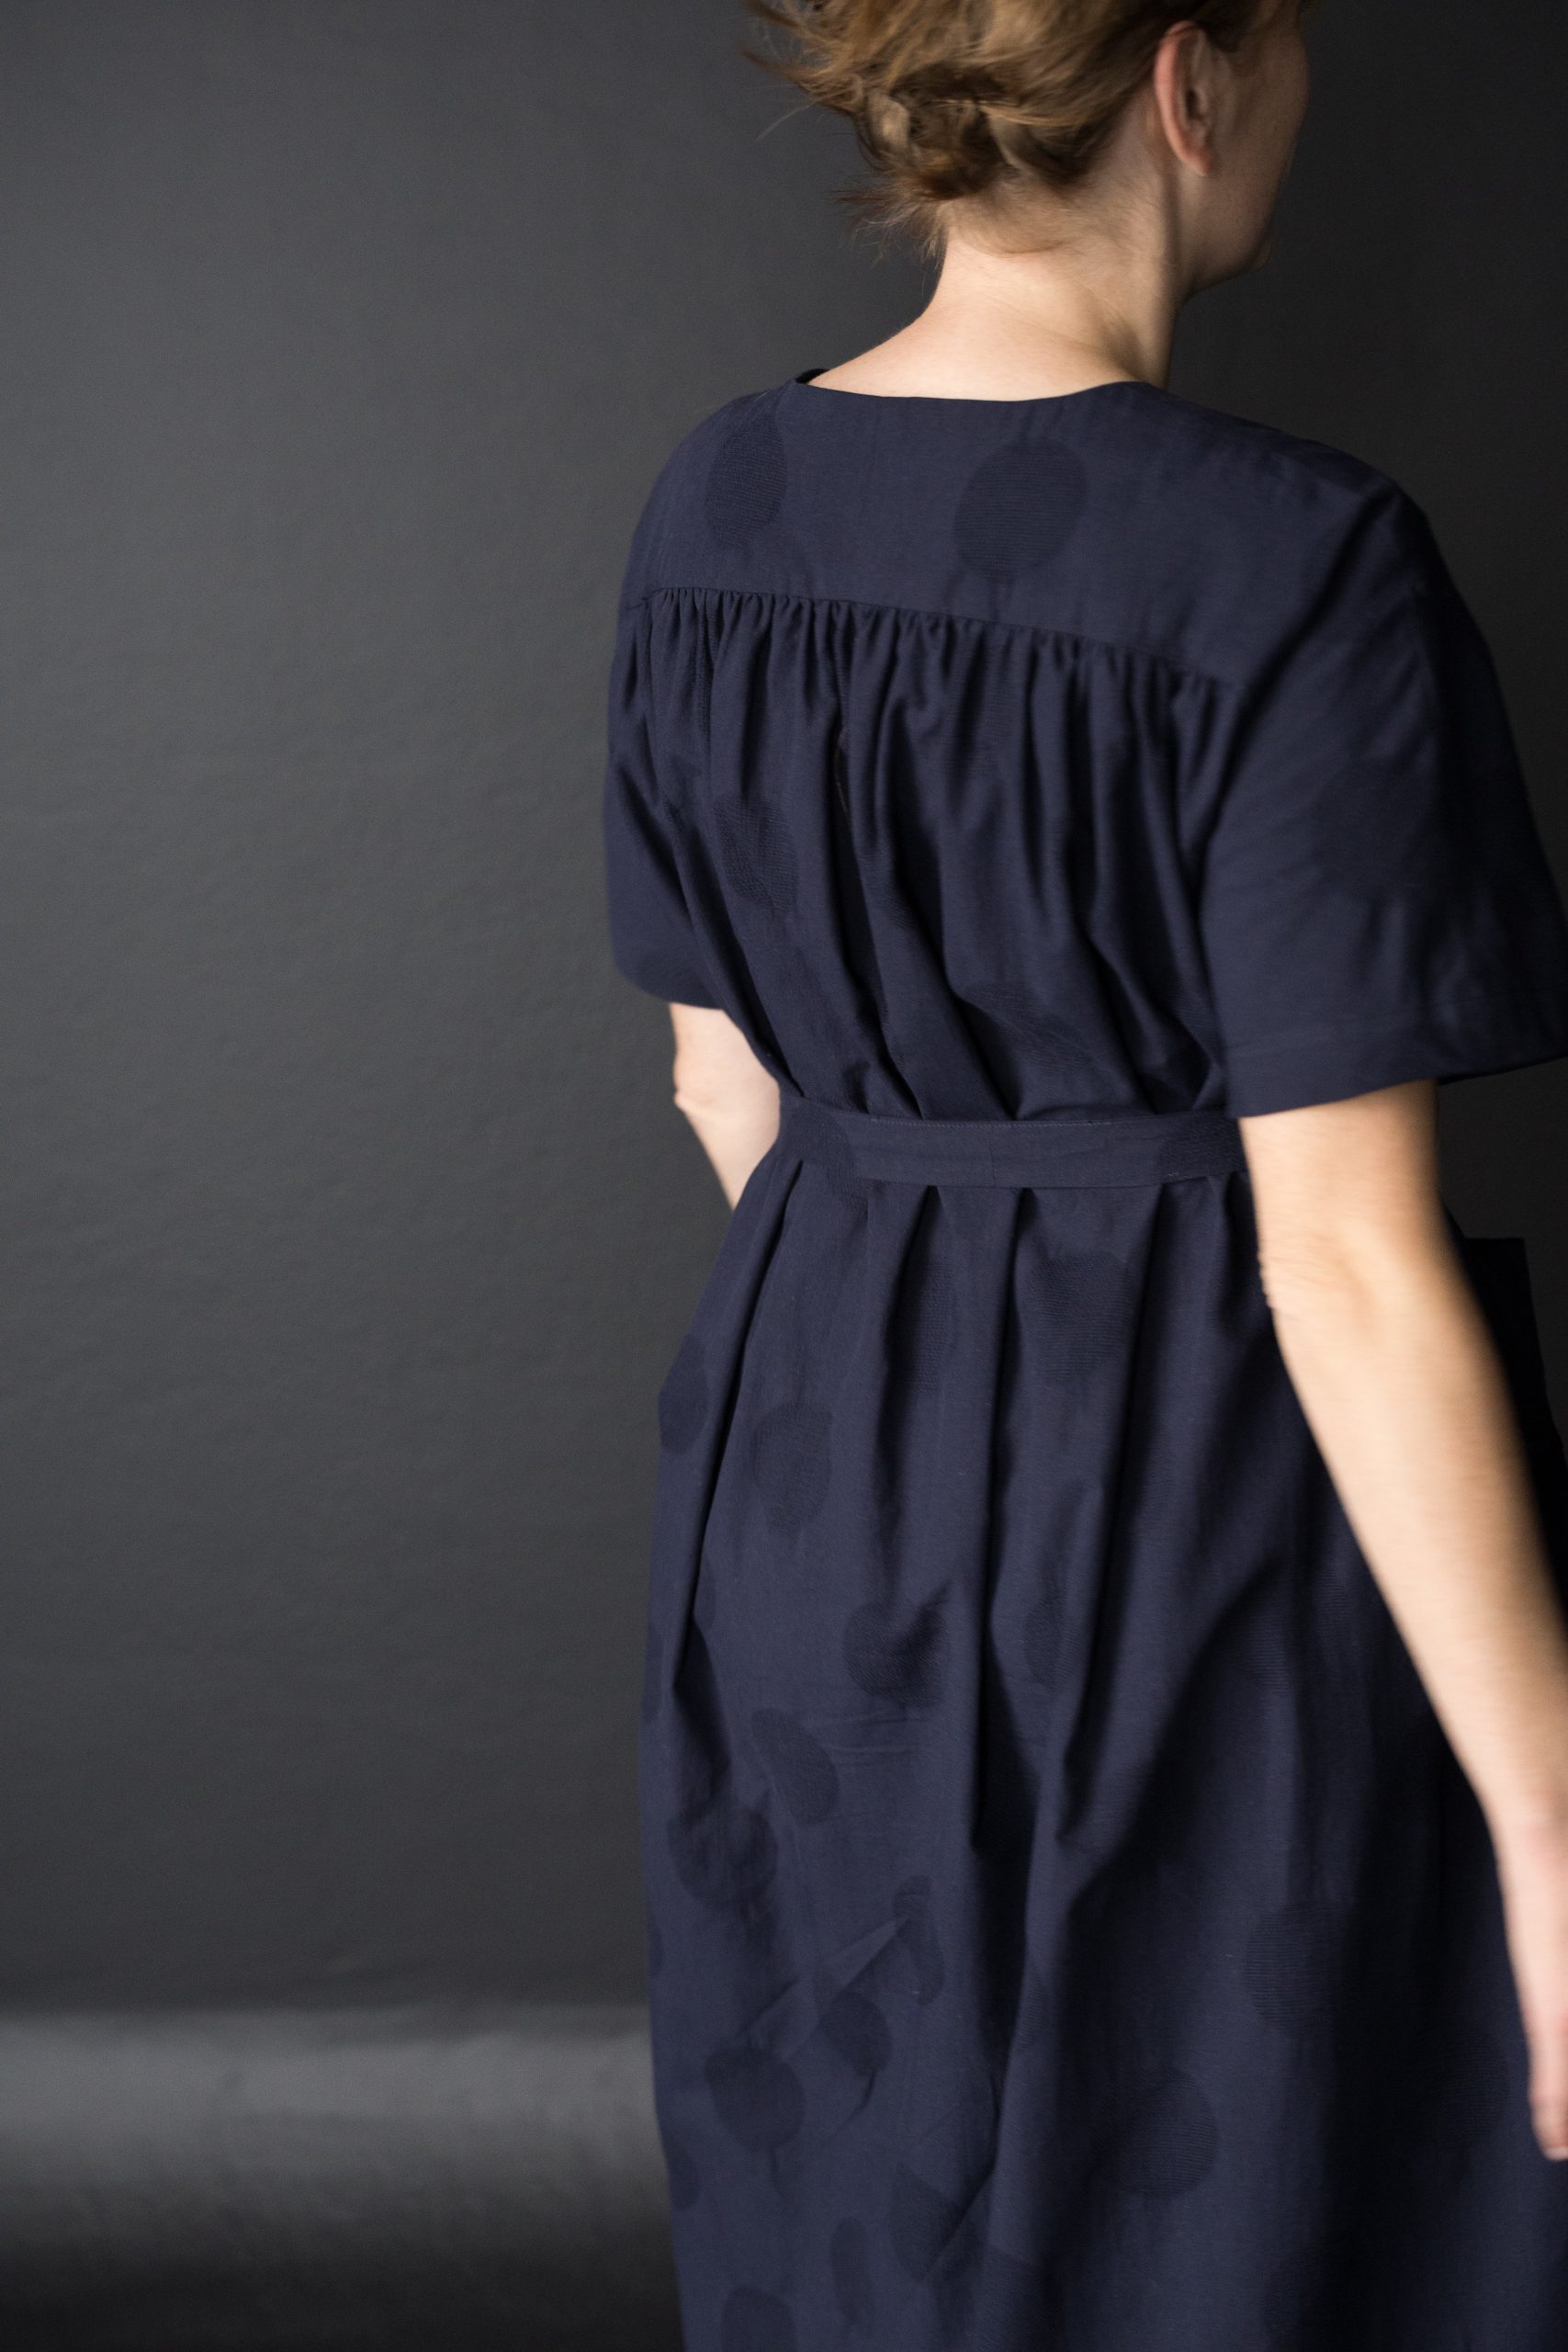 Merchant & Mills Omilie Top or Dress - The Fold Line